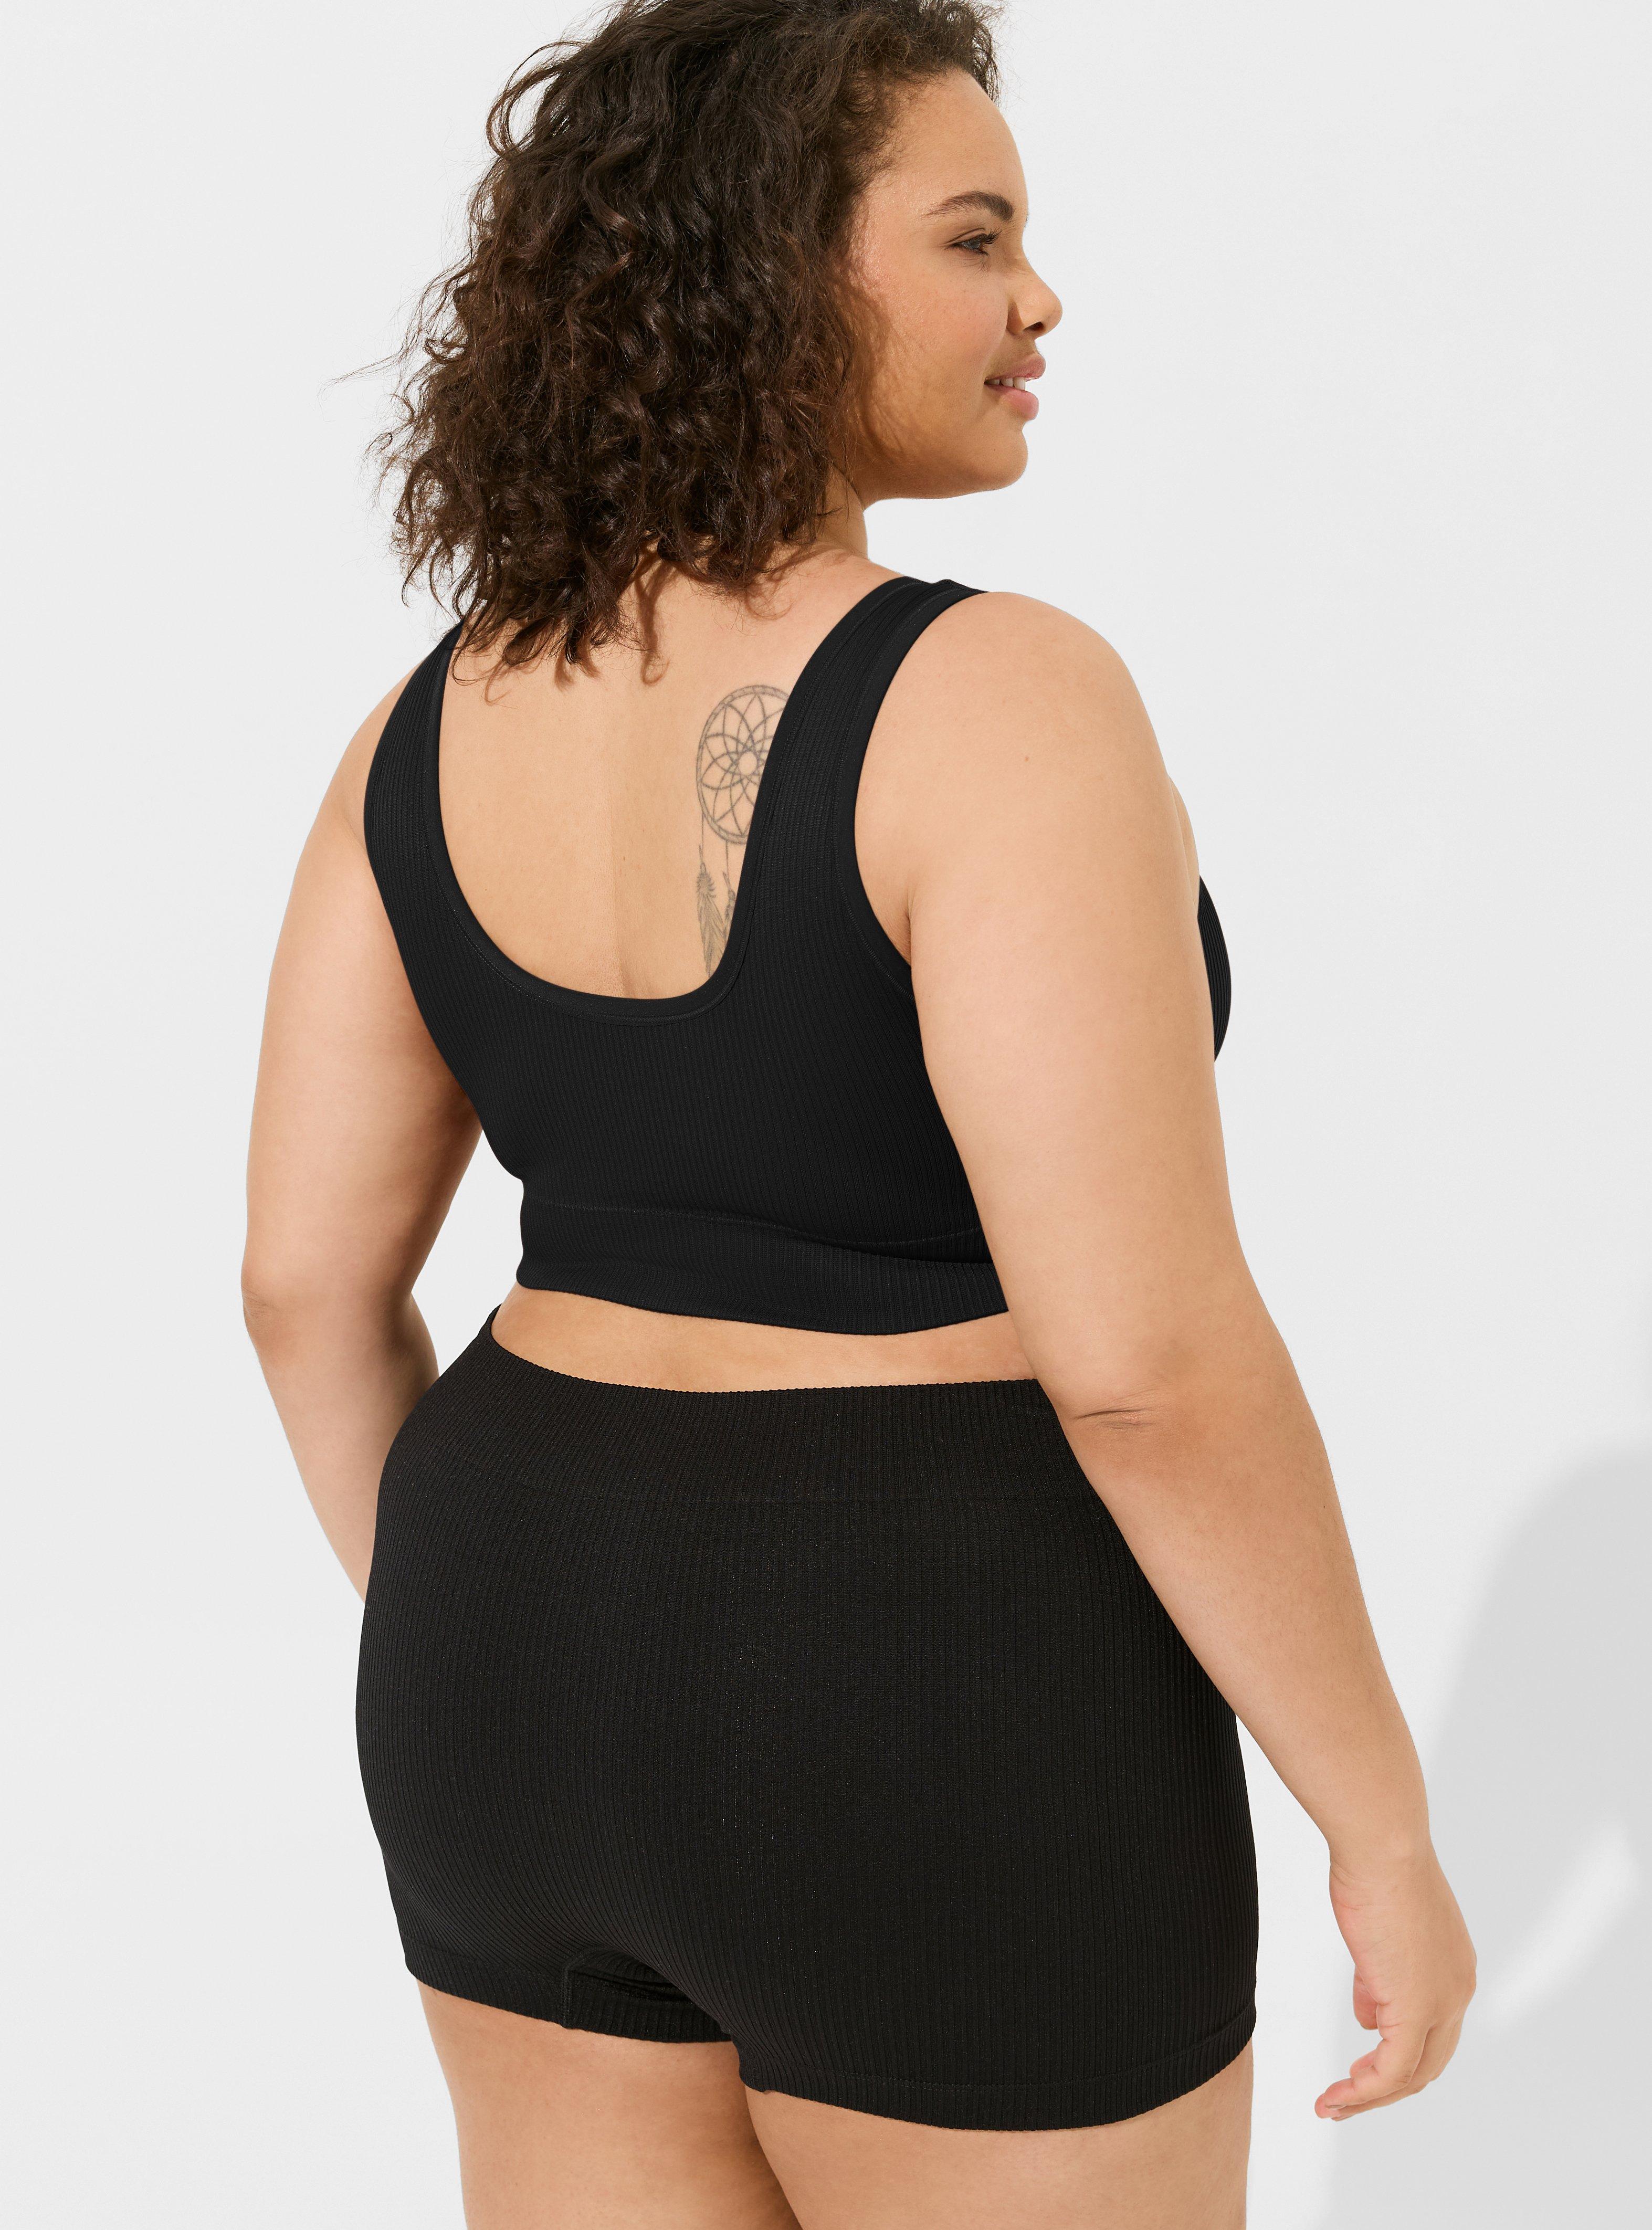 Plus Size Underwear: Six of My Faves for Curvy Women